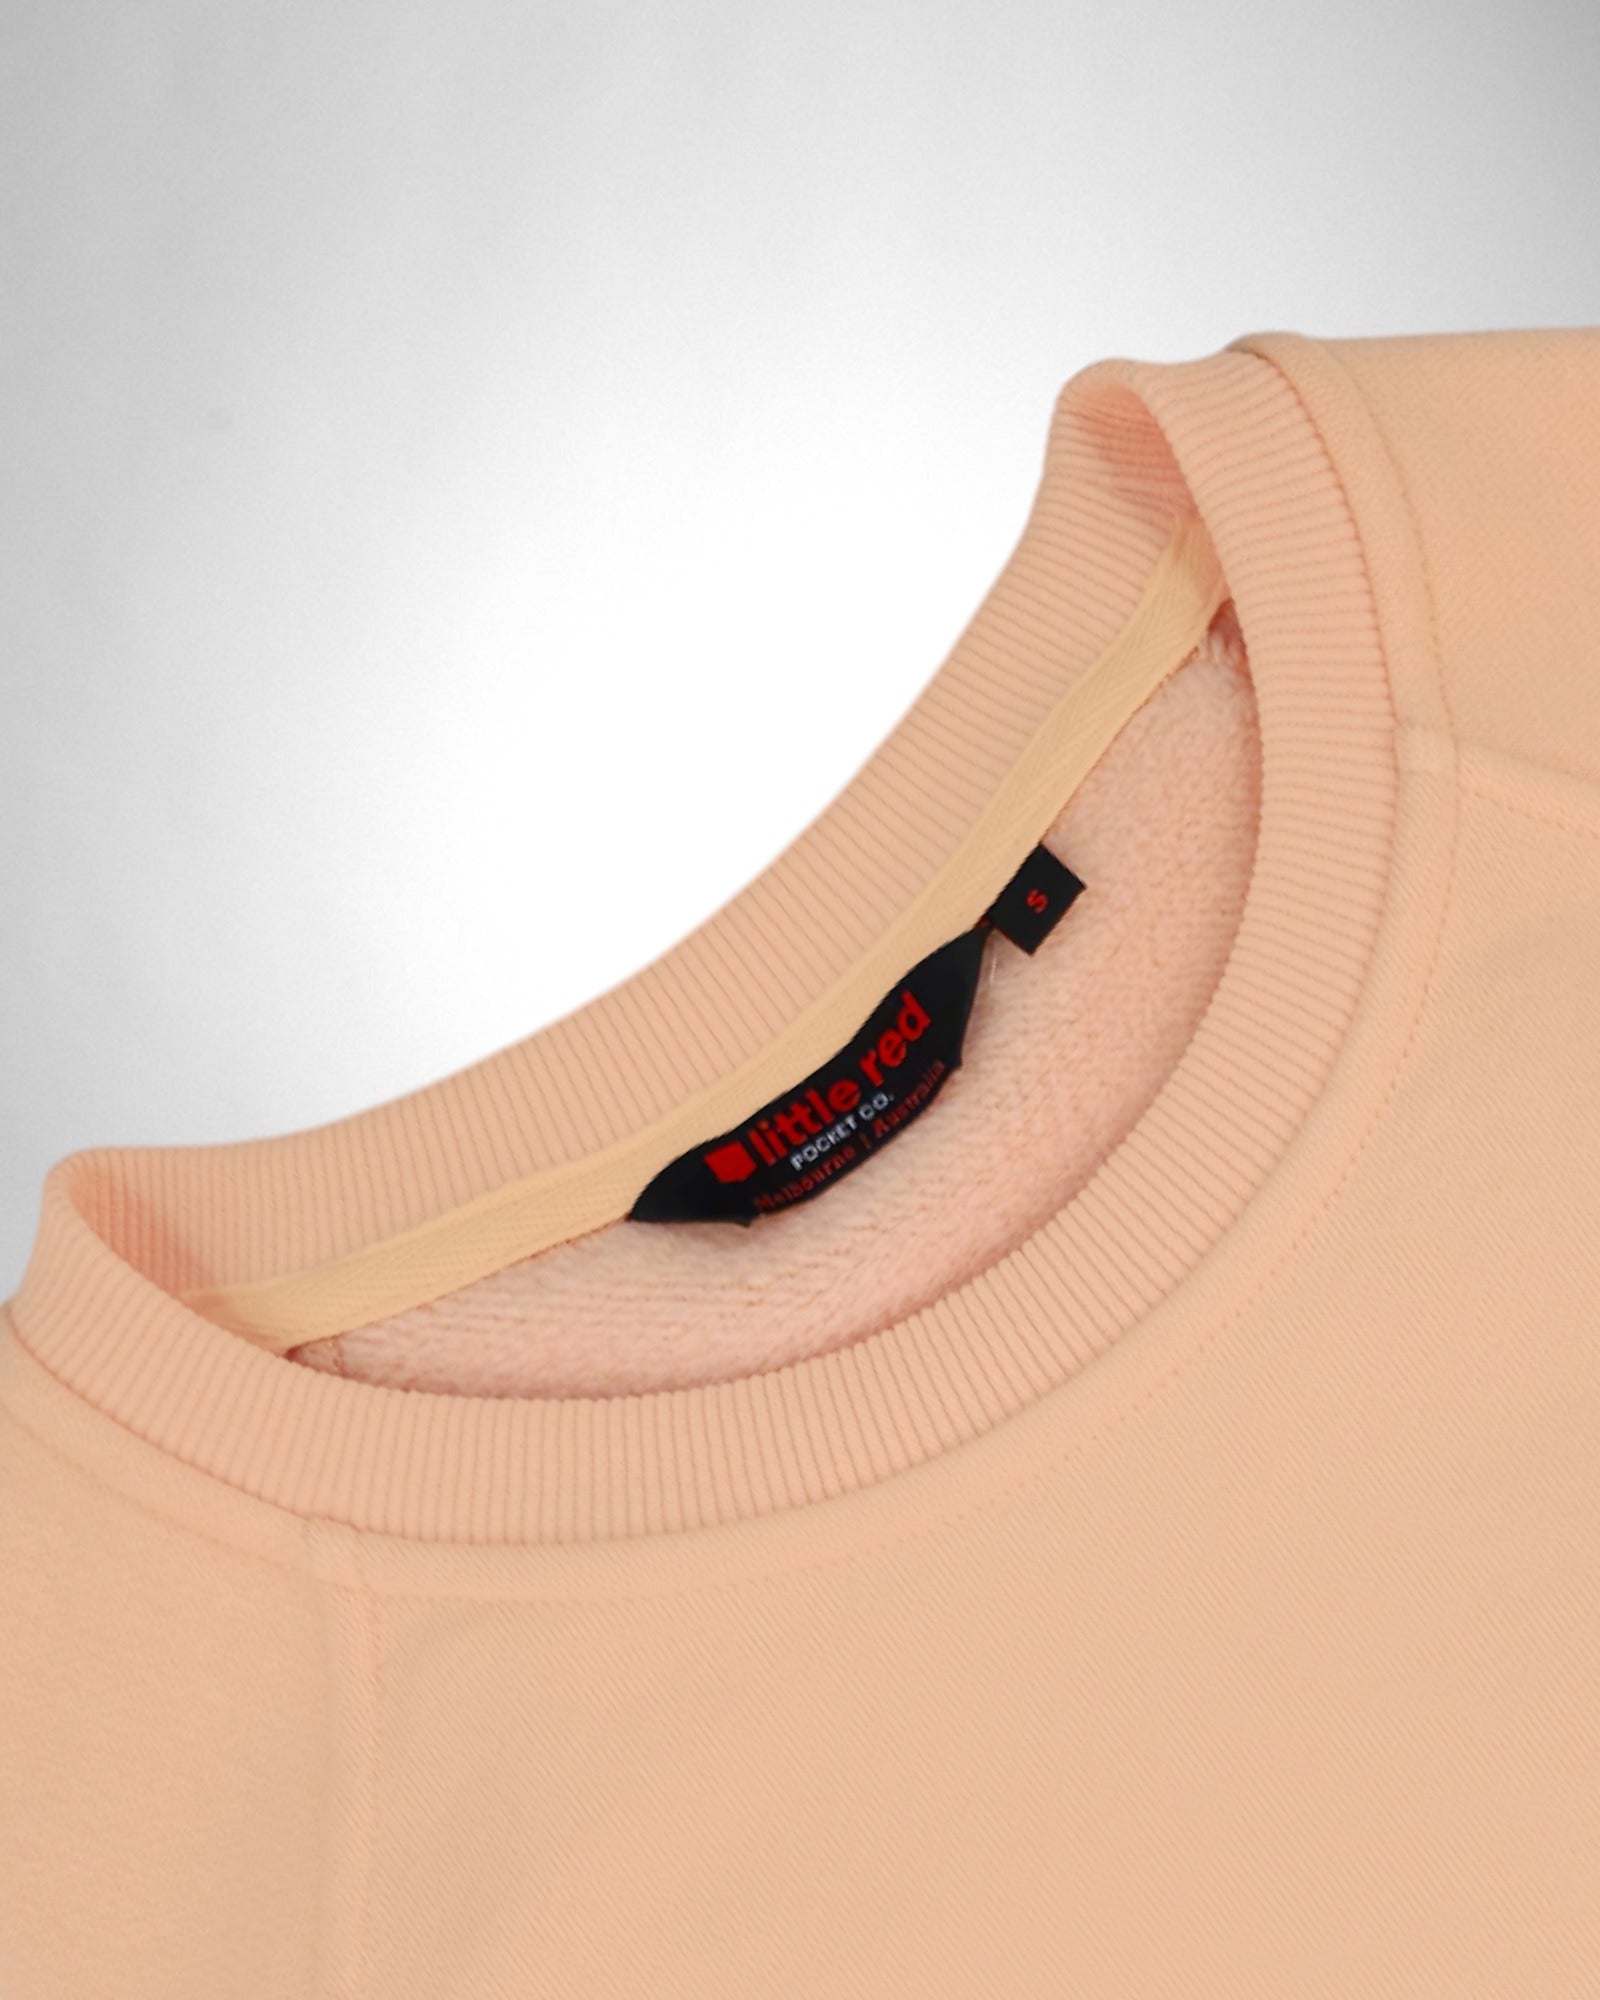 "Catch Some Clean Air" Female Crewneck Sweater - Apricot